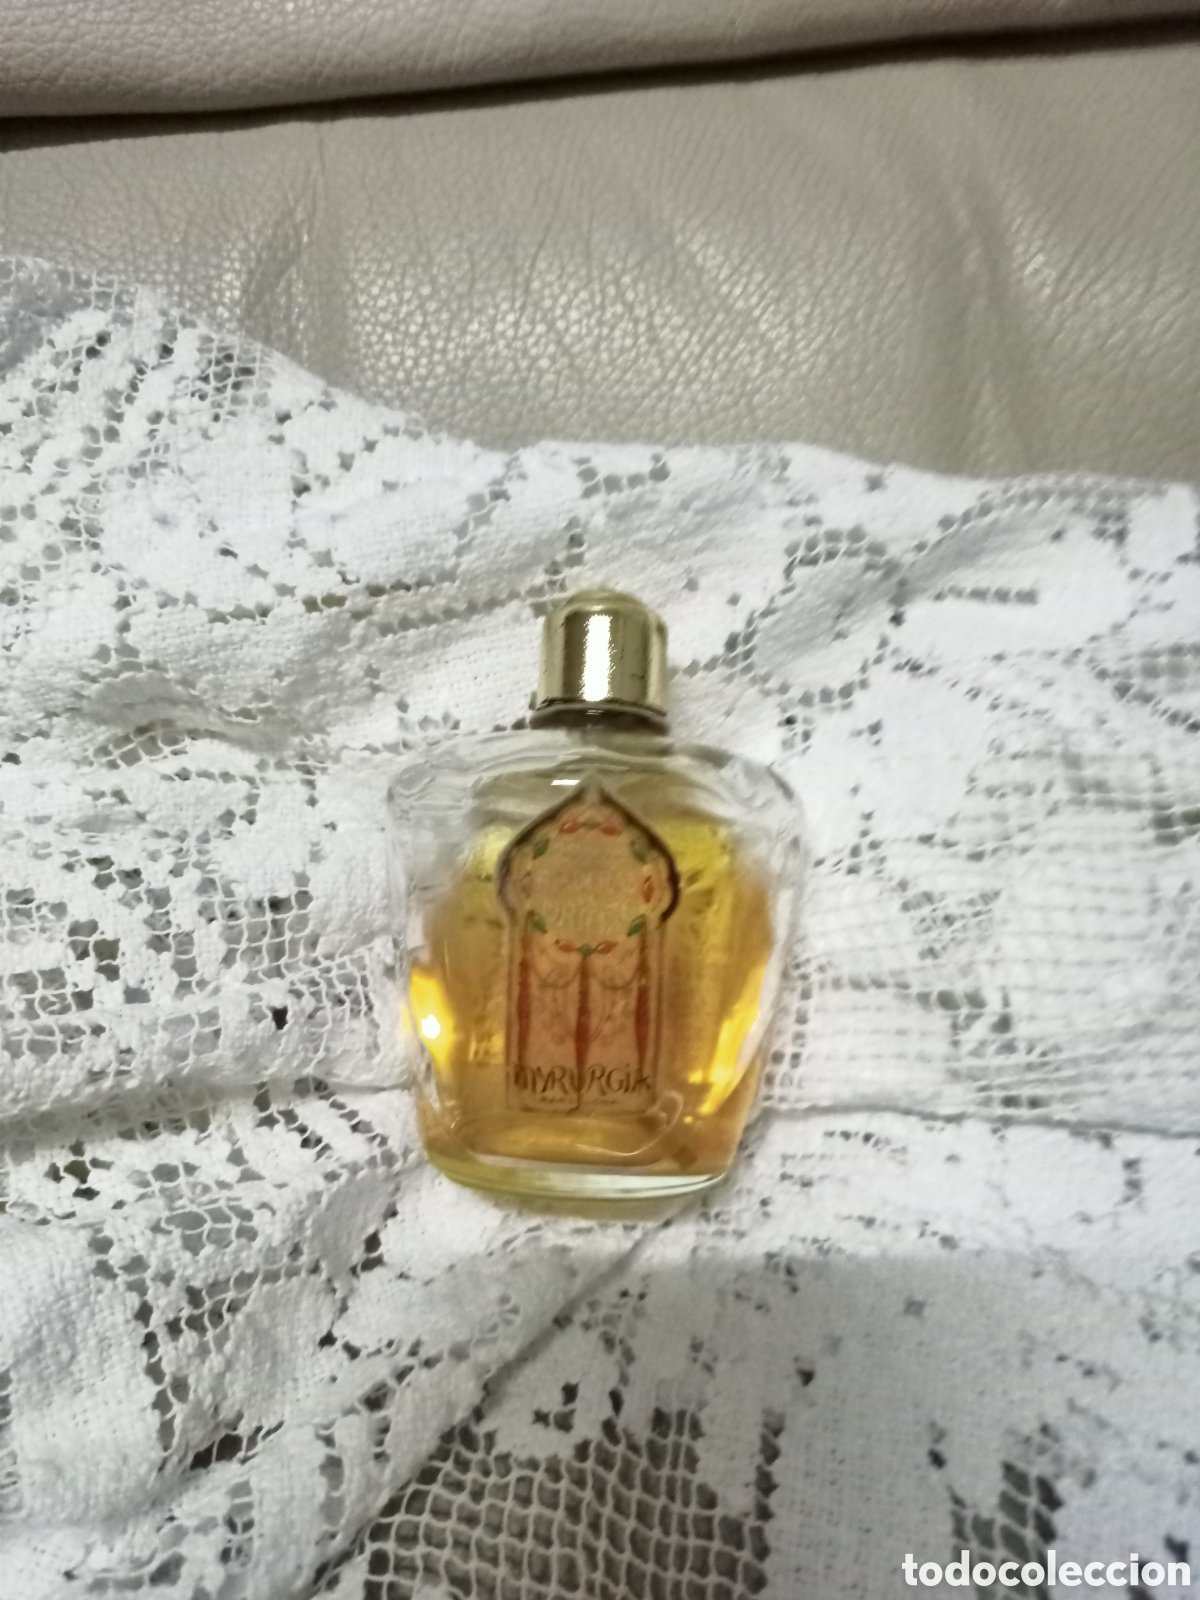 Auctions of Antique perfume miniatures and bottles